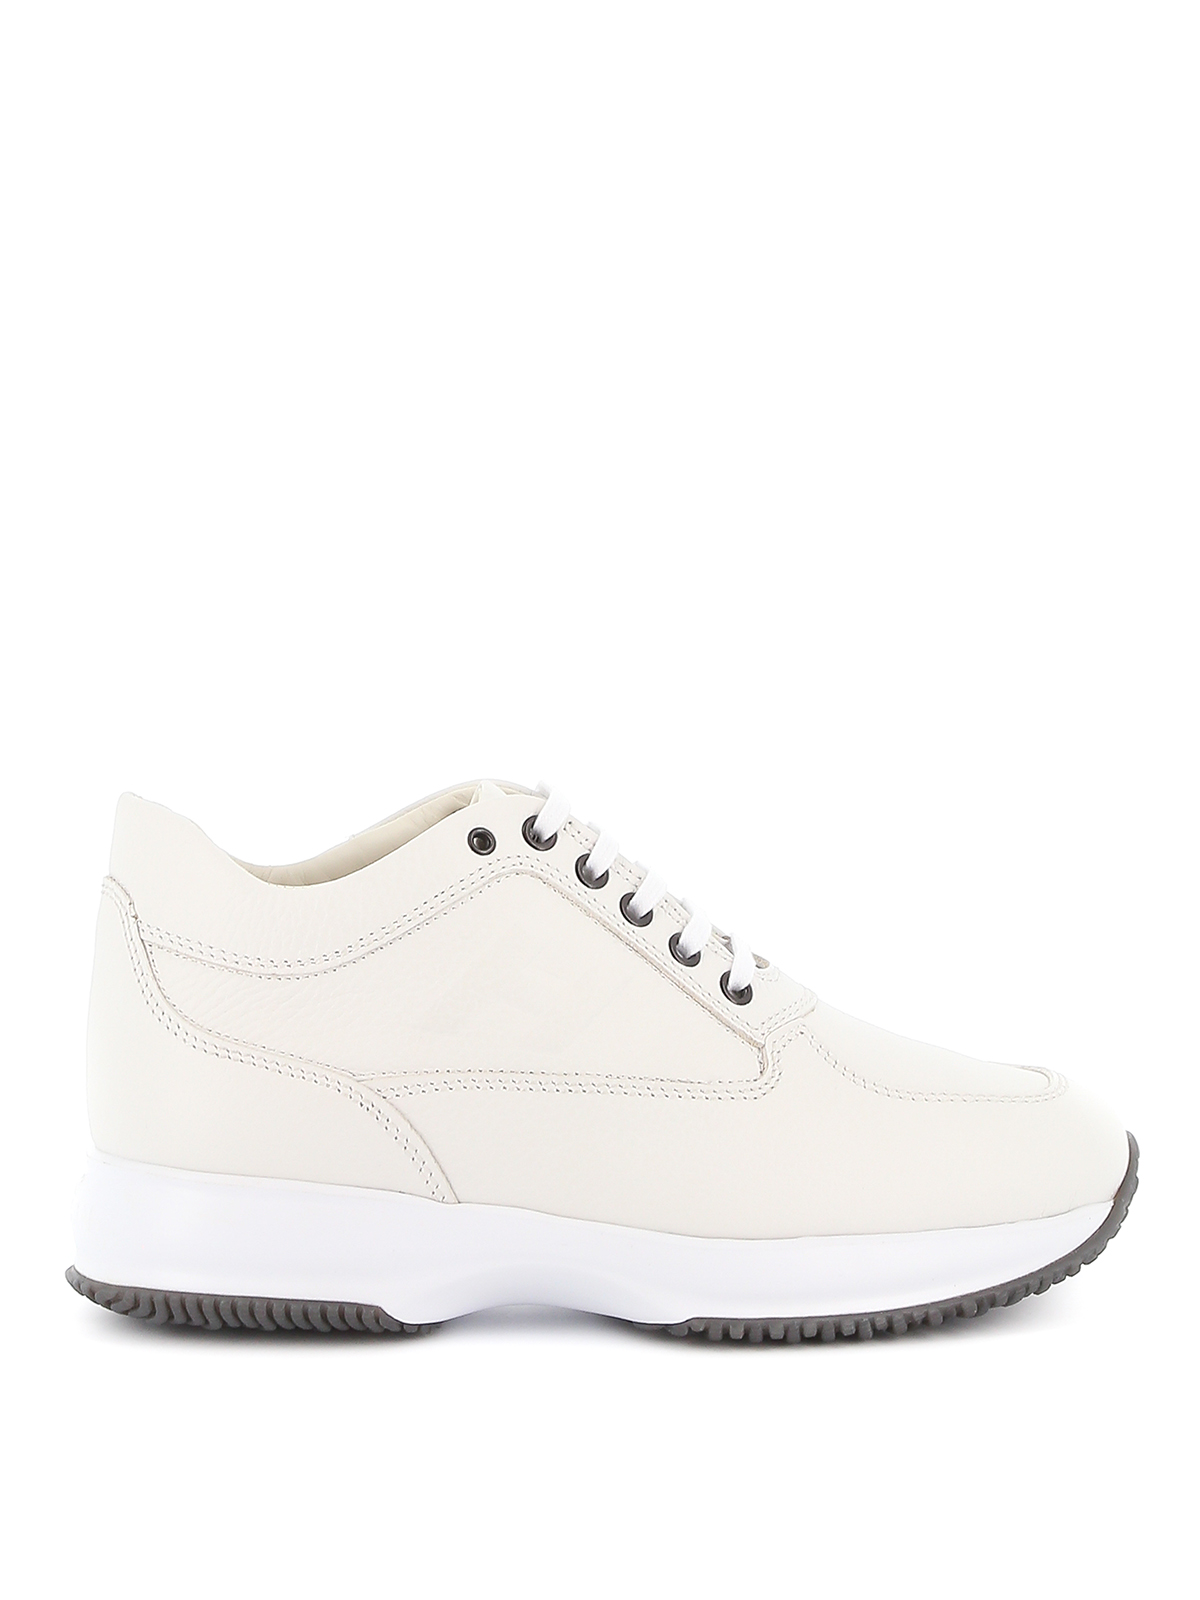 Hogan - Summer Interactive white leather sneakers - trainers ...